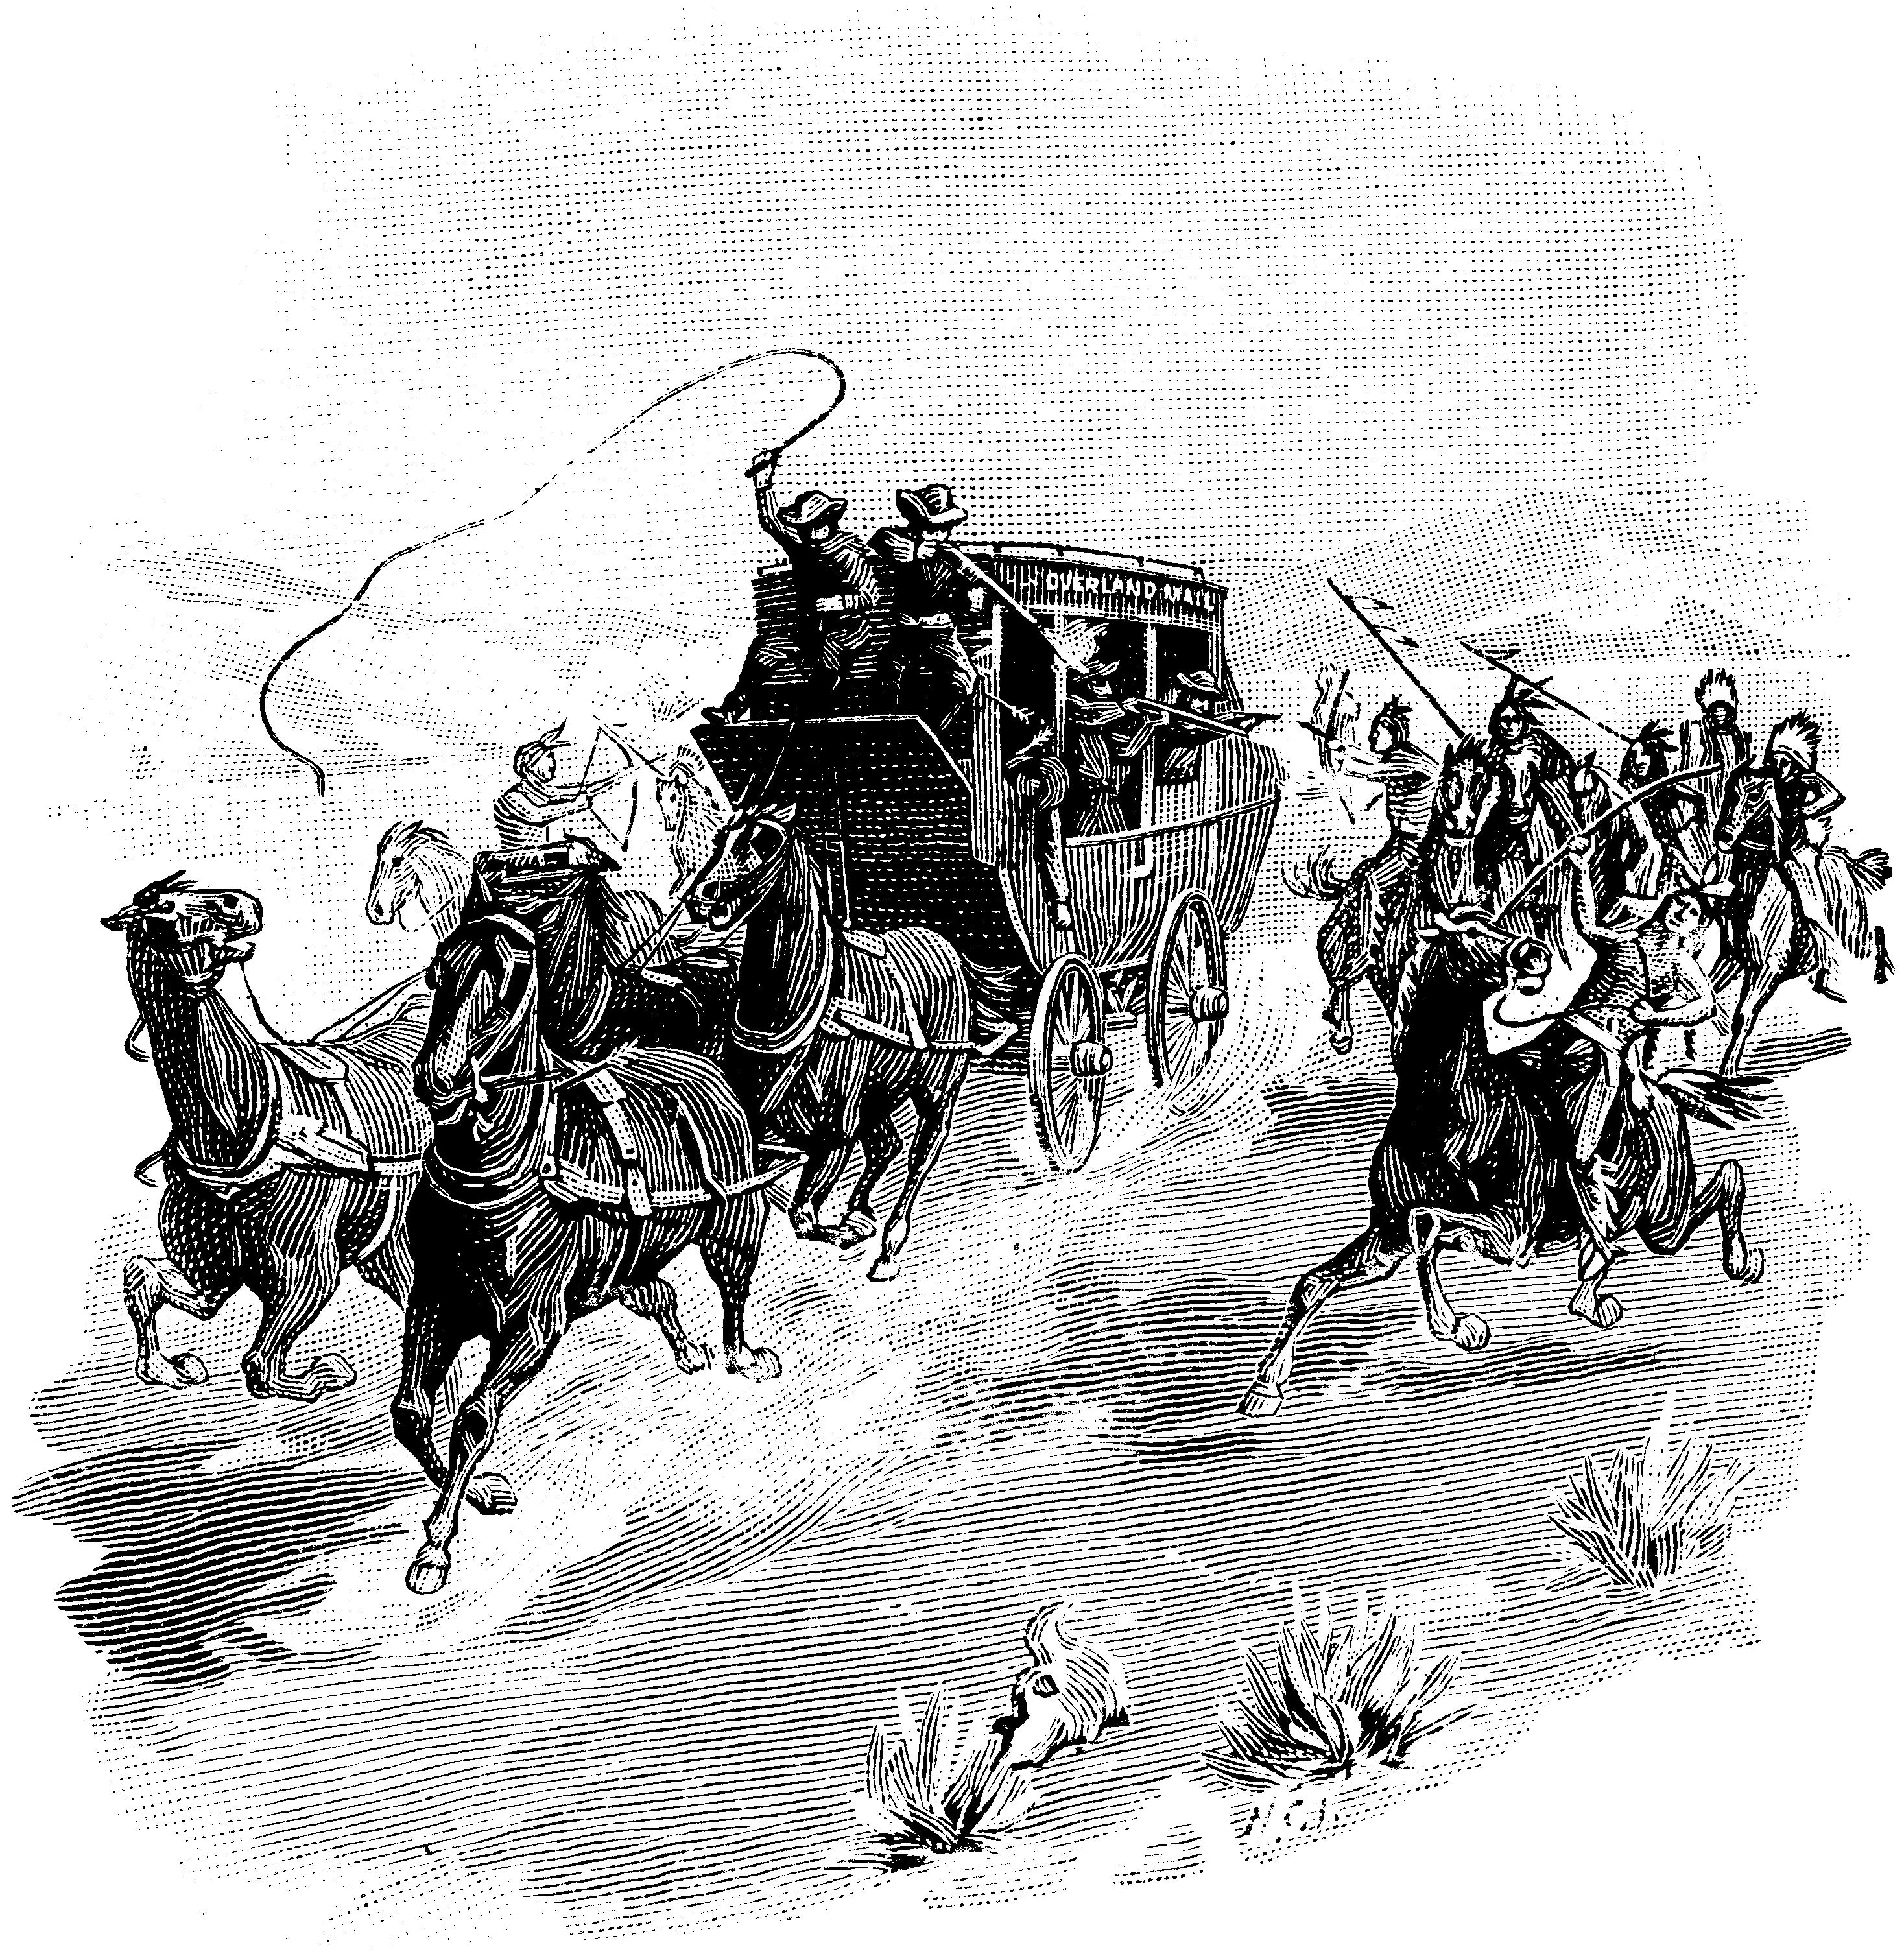 Artist Print from “Stagecoach"